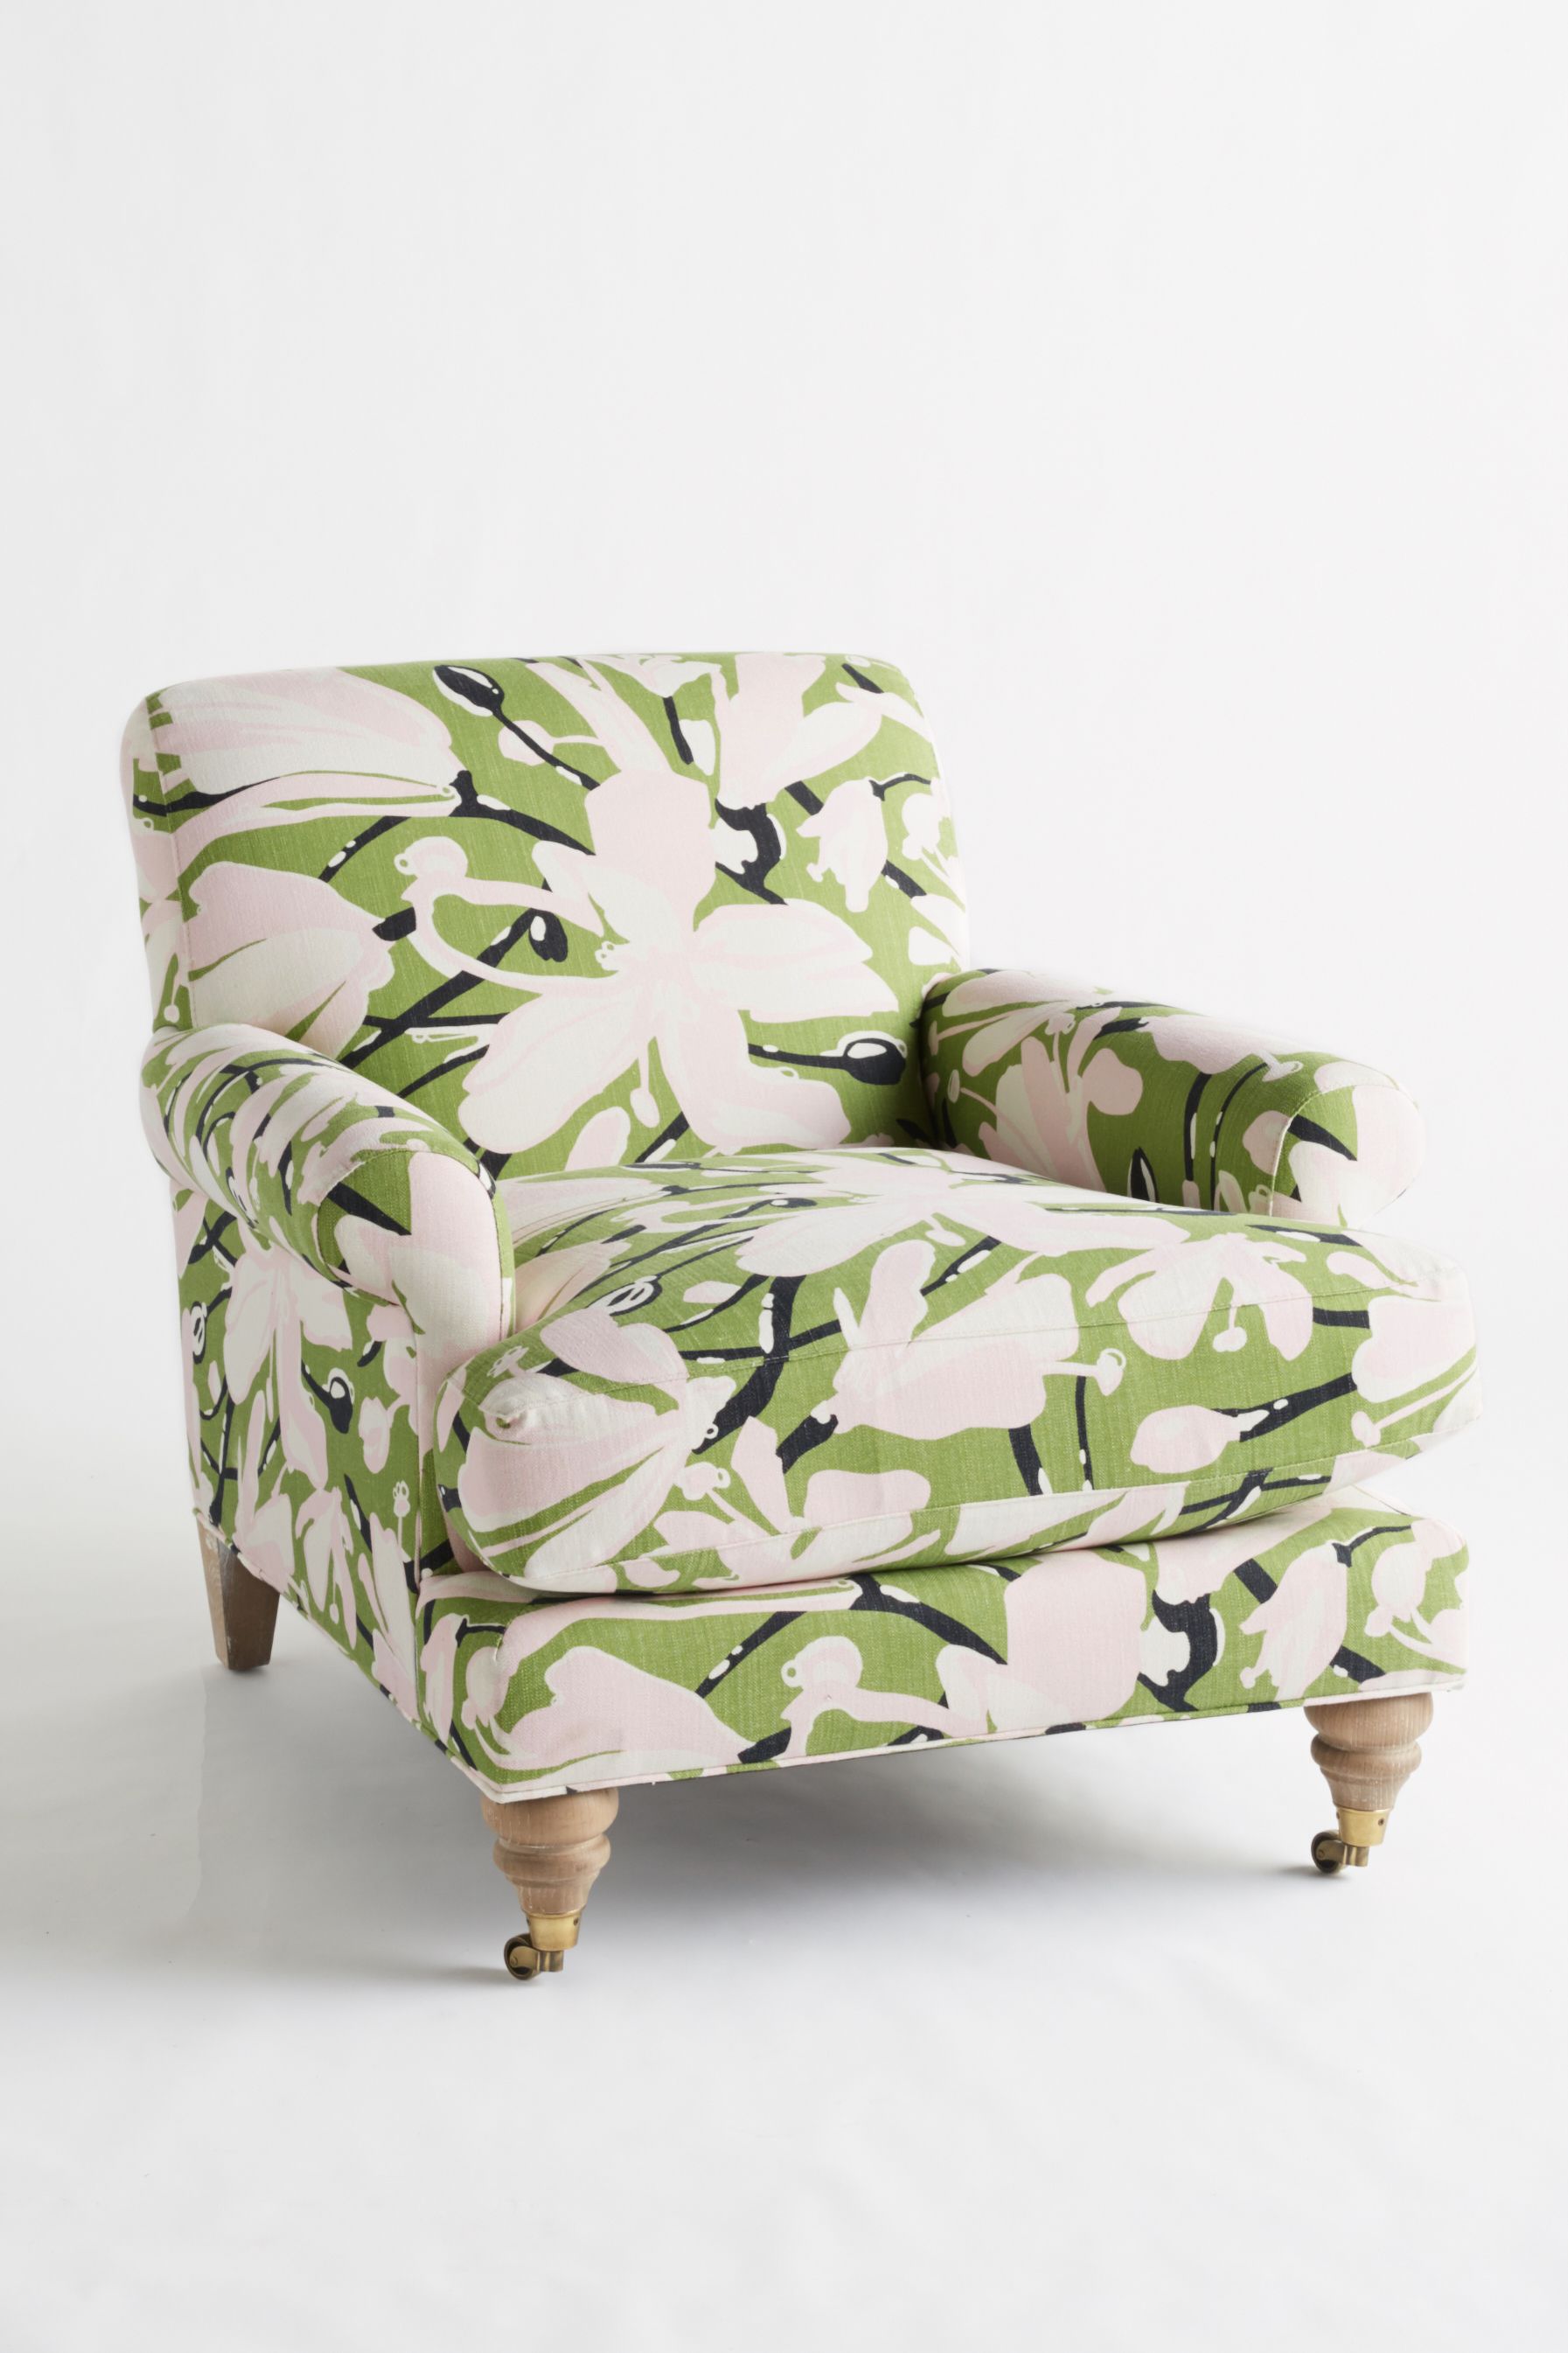 patterned anthropologie collection